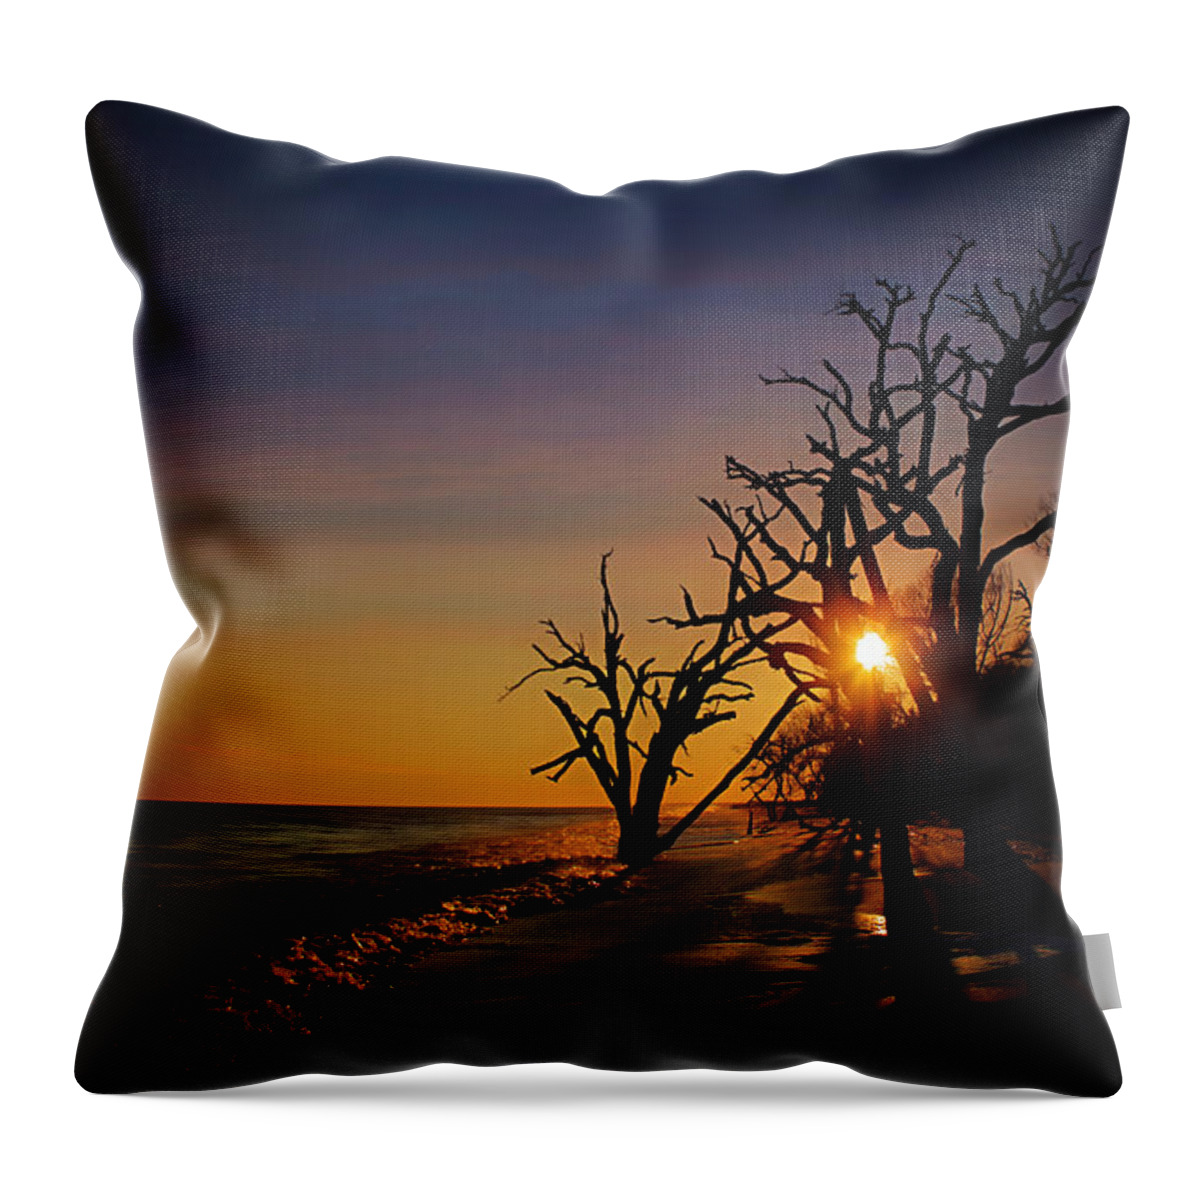 Botany Bay Throw Pillow featuring the photograph Botany Bay by Jessica Brawley